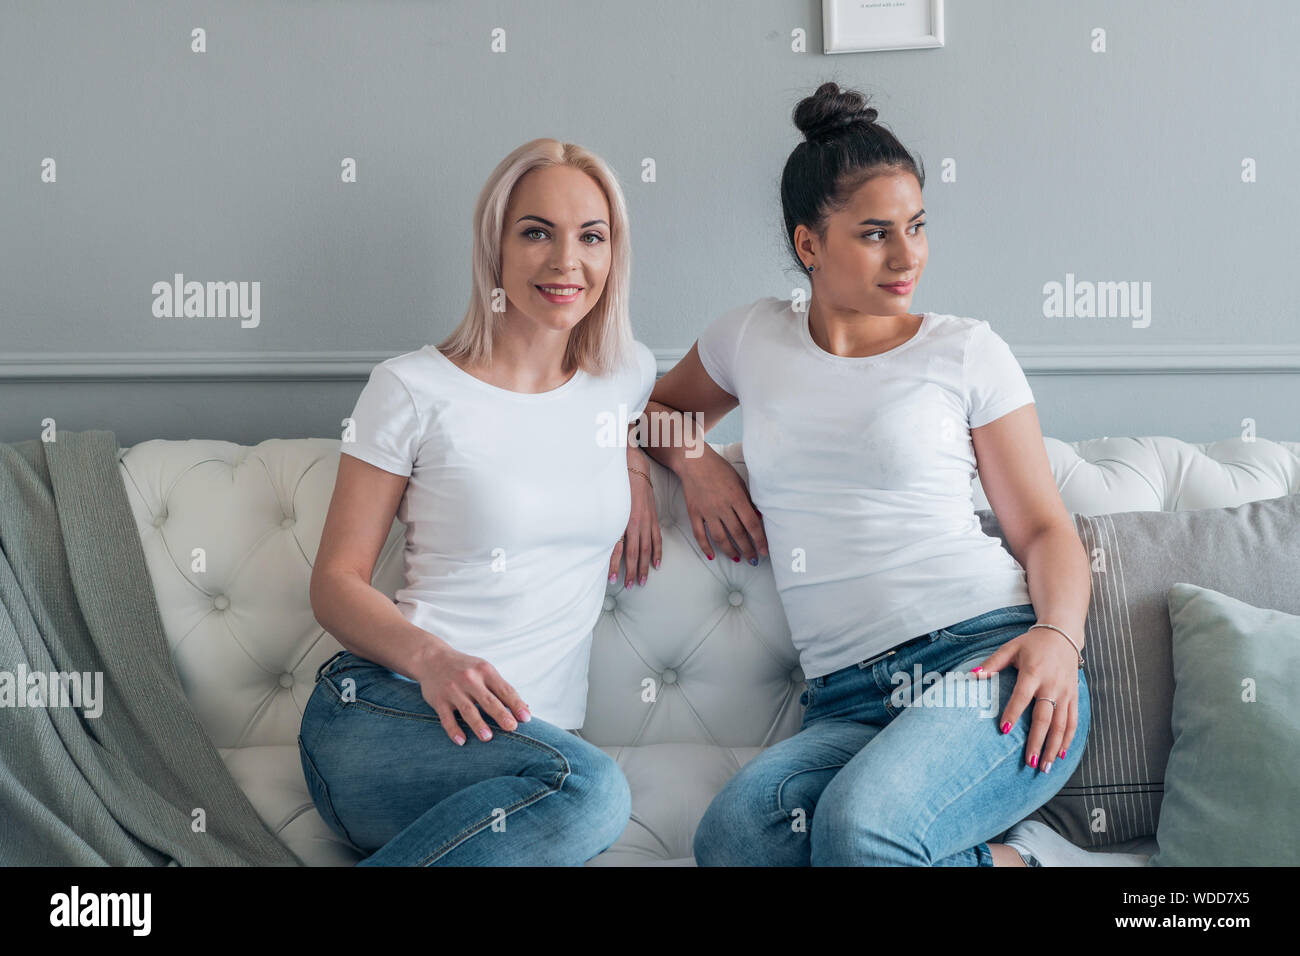 Two attractive girls dressed in casual style sitting on the couch in the room Stock Photo